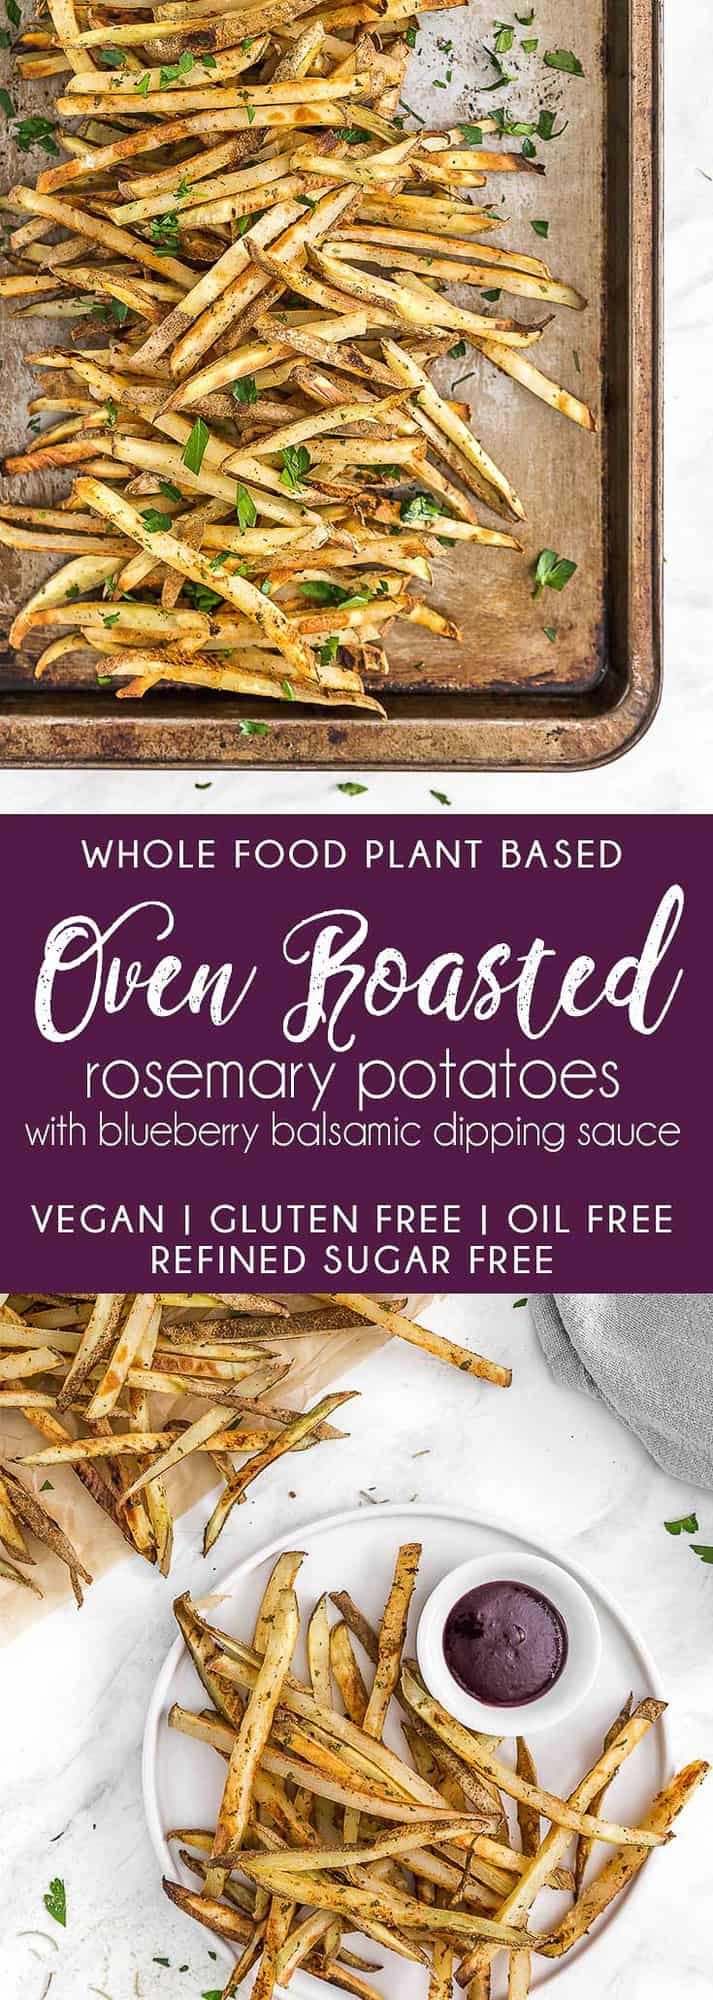 Oven Roasted Rosemary Potatoes with Blueberry Balsamic Dipping Sauce, Vegan sauce, vegan sides, oven roasted potatoes, roasted potatoes, rosemary potatoes, blueberry sauce, plant based side, plant based, vegan, vegetarian, whole food plant based, gluten free, recipe, wfpb, healthy, healthy vegan, oil free, no refined sugar, no oil, refined sugar free, dairy free, dairy, dinner, lunch, healthy recipe, vegan potatoes